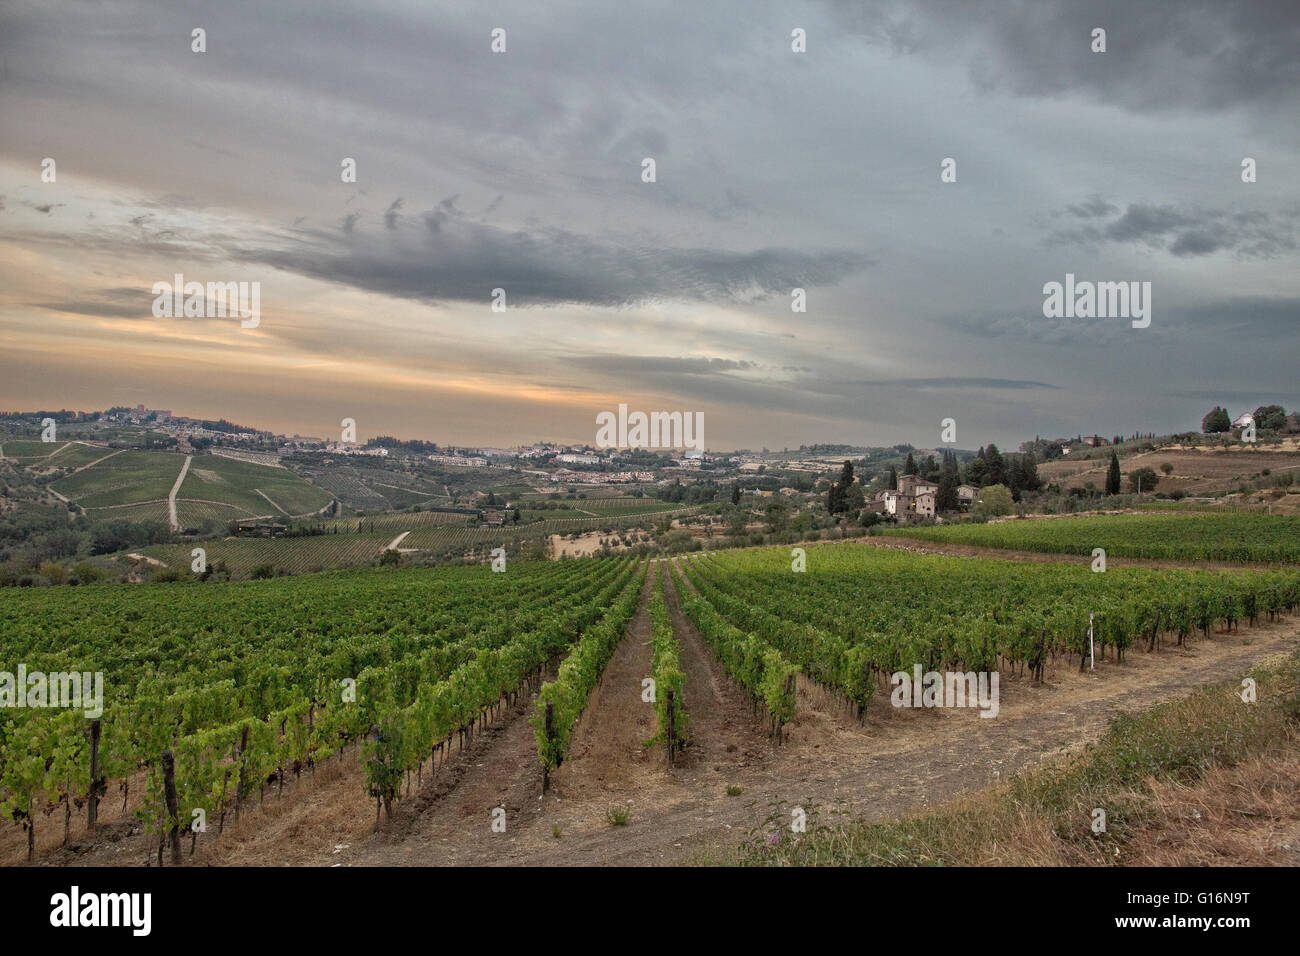 View of vineyards in Tuscany, Italy Stock Photo